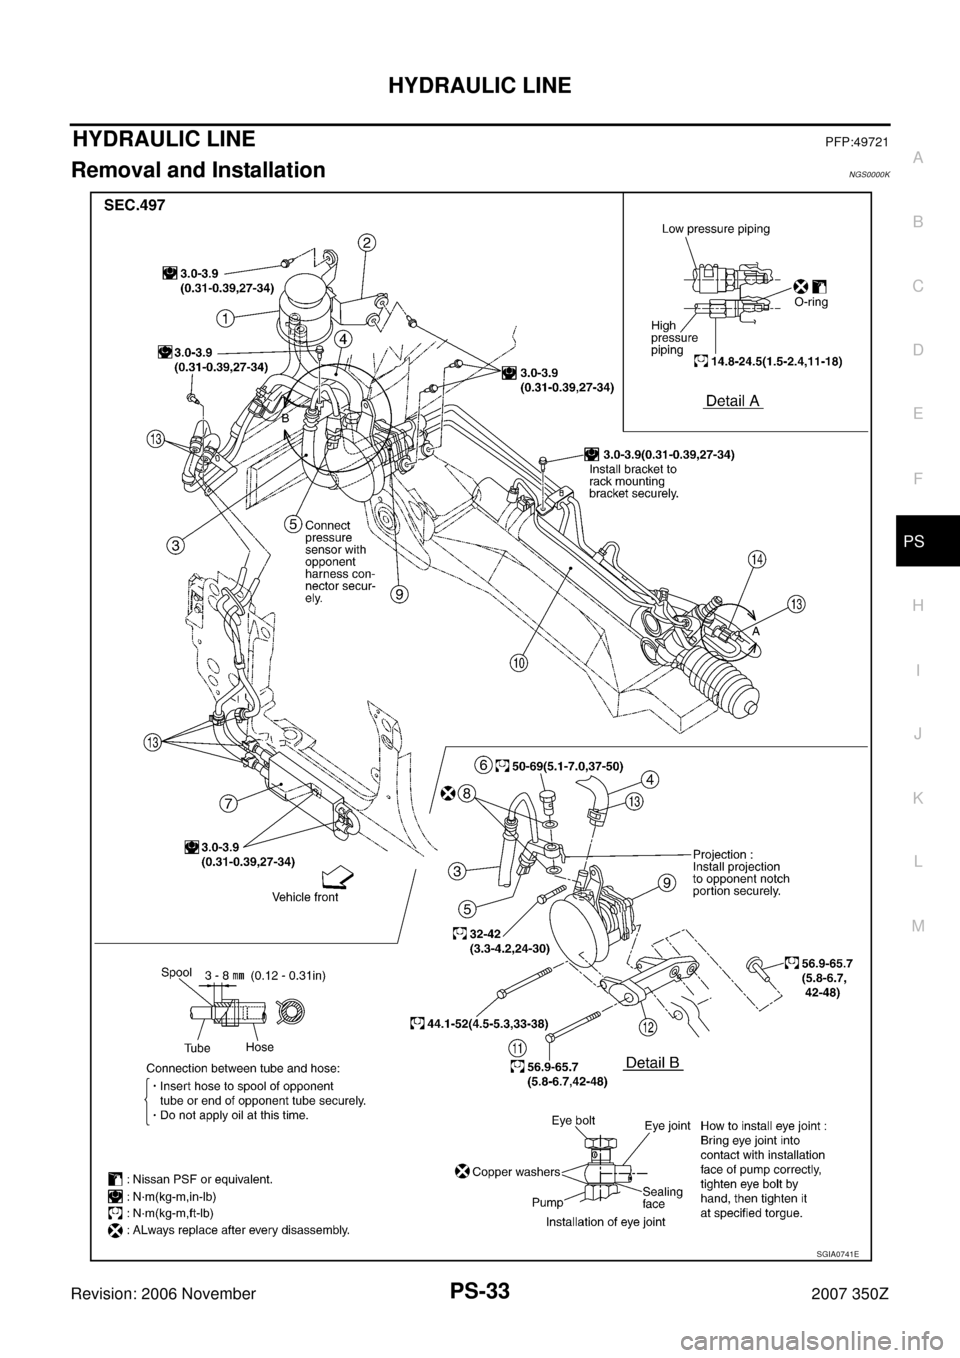 NISSAN 350Z 2007 Z33 Power Steering System Owners Guide HYDRAULIC LINE
PS-33
C
D
E
F
H
I
J
K
L
MA
B
PS
Revision: 2006 November2007 350Z
HYDRAULIC LINEPFP:49721
Removal and InstallationNGS0000K
SGIA0741E 